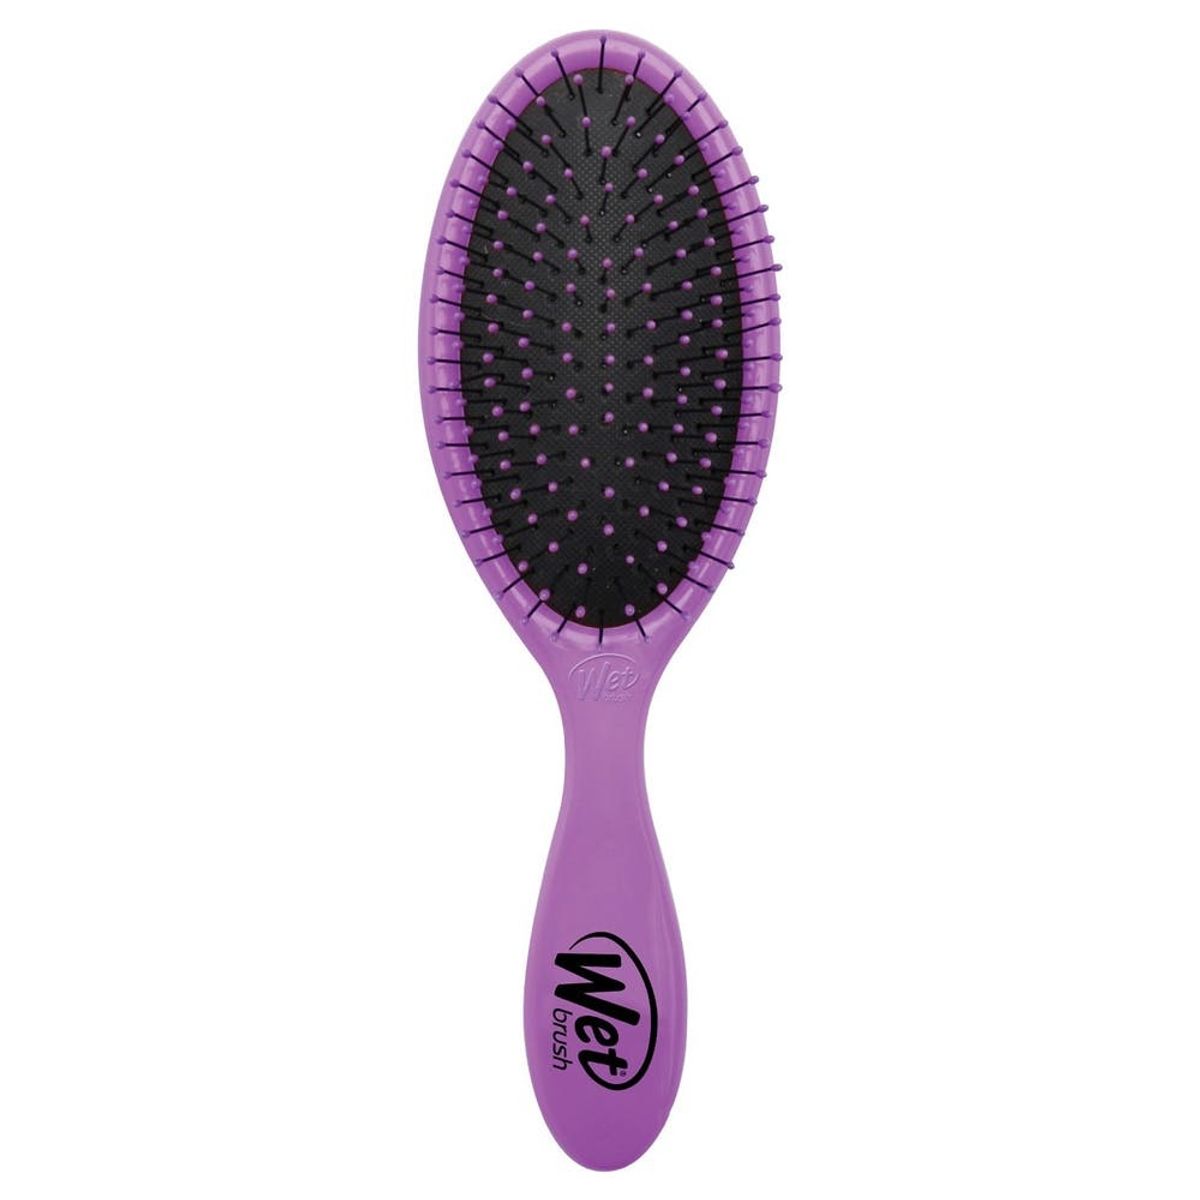 6 Hair Brushes That Will Make Tangles a Thing of the Past